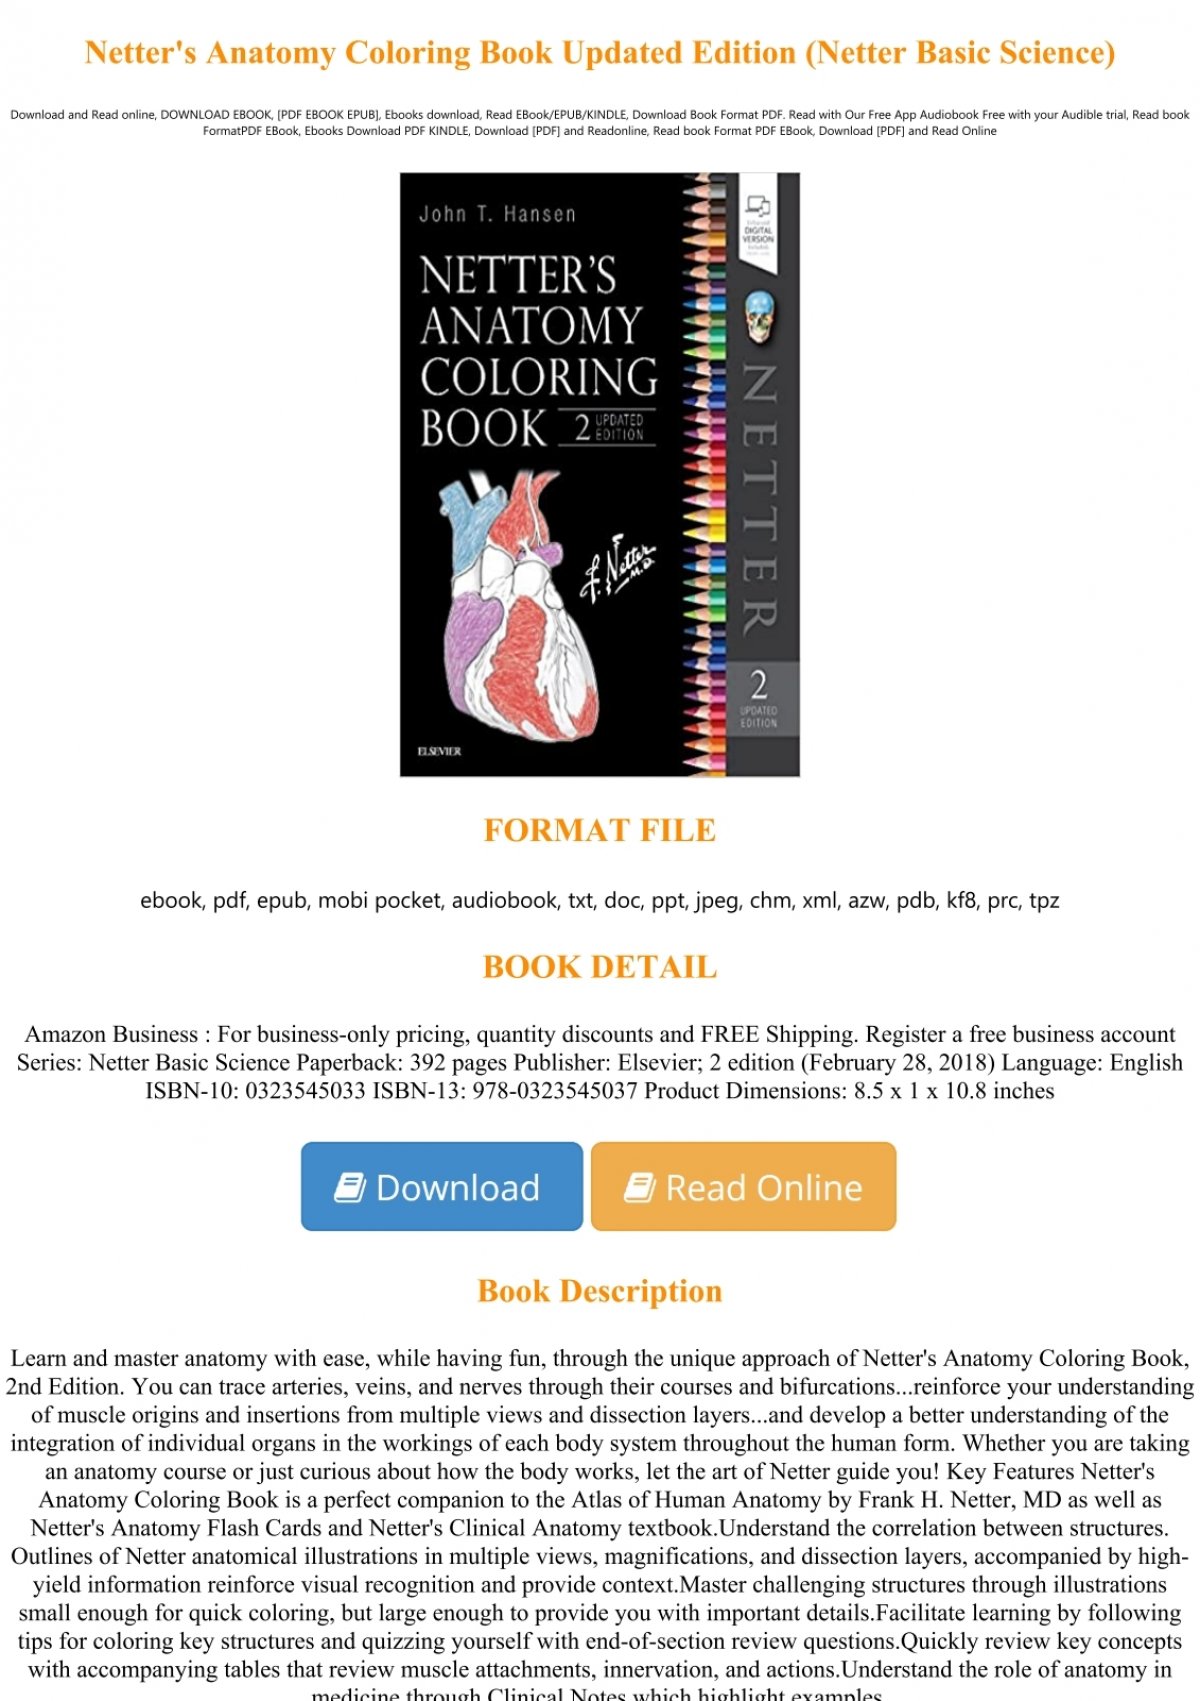 Download Pdf Download Netter S Anatomy Coloring Book Updated Edition Netter Basic Science Full Pages